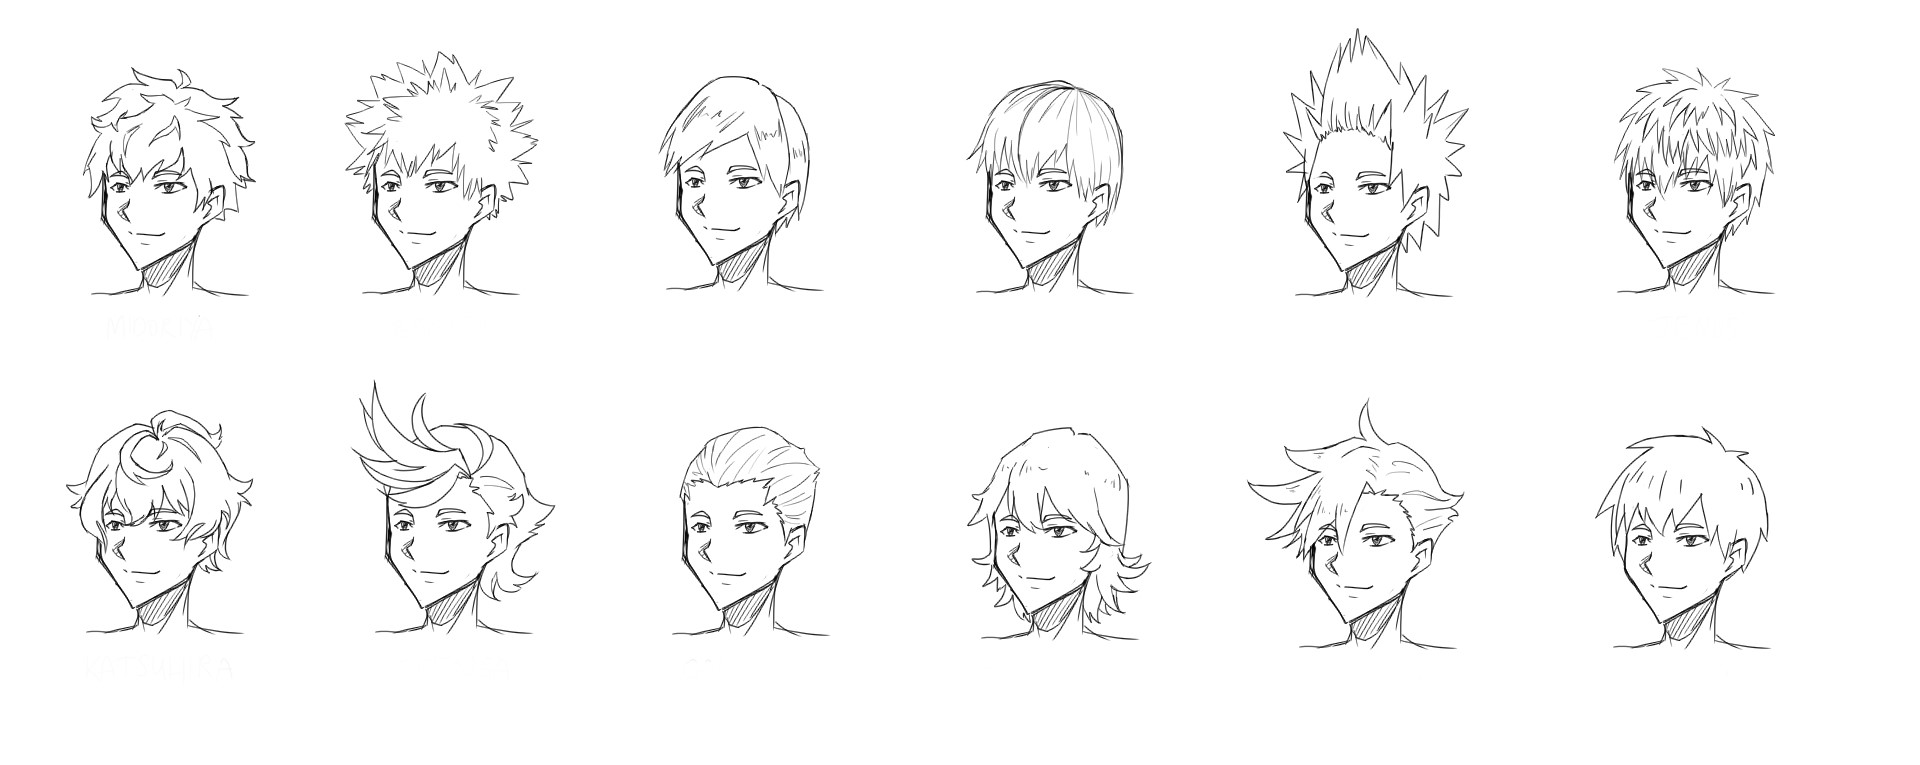 Male Hair References by whymeiy on DeviantArt